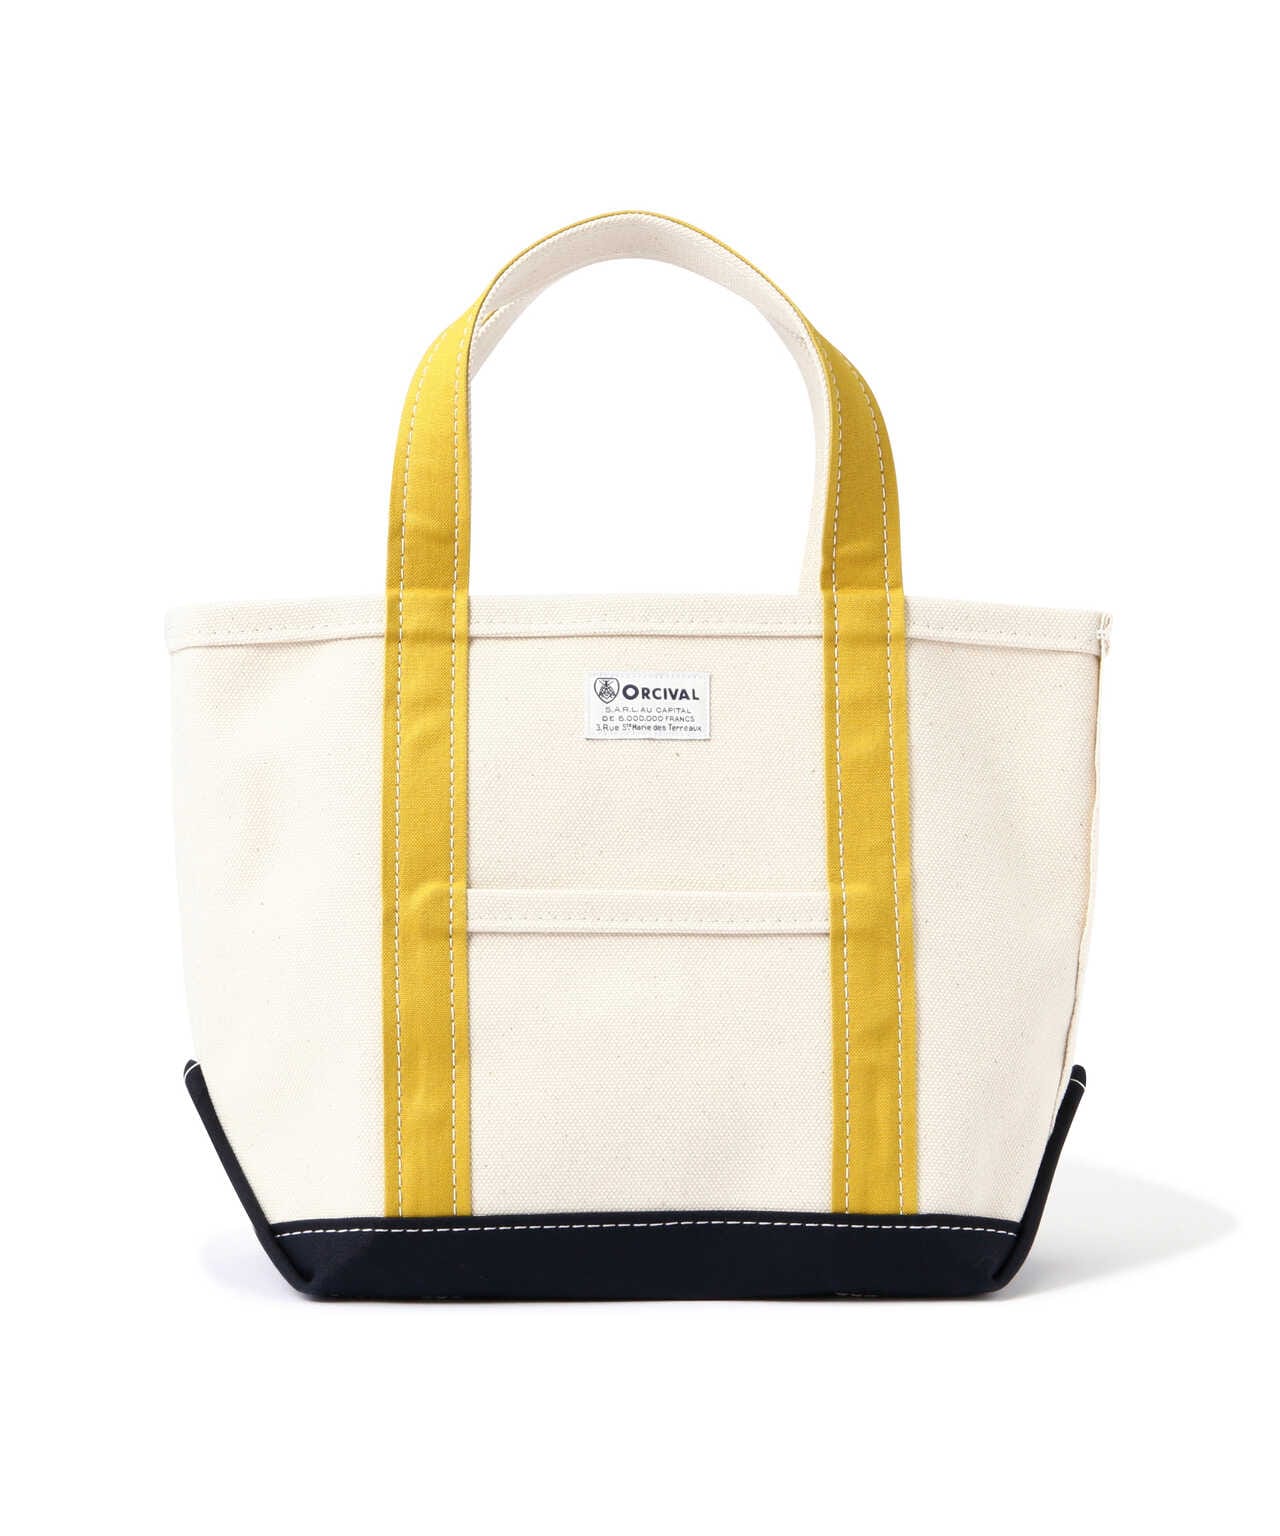 ORCIVAL キャンバストートバッグ HVC 24 oz CANVAS TOTE BAG-